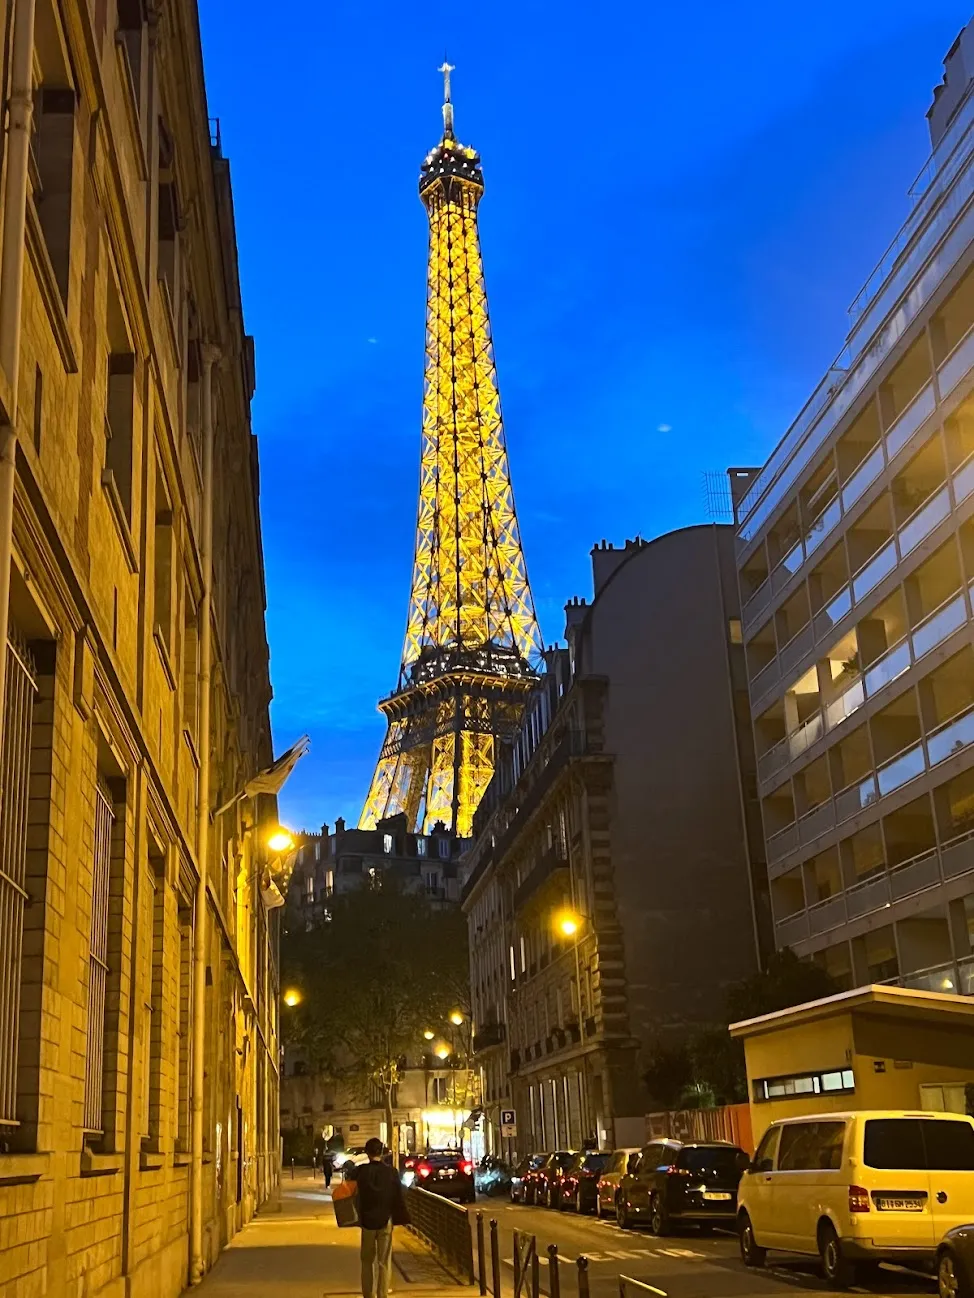 Eiffel Tower lit up during blue hour